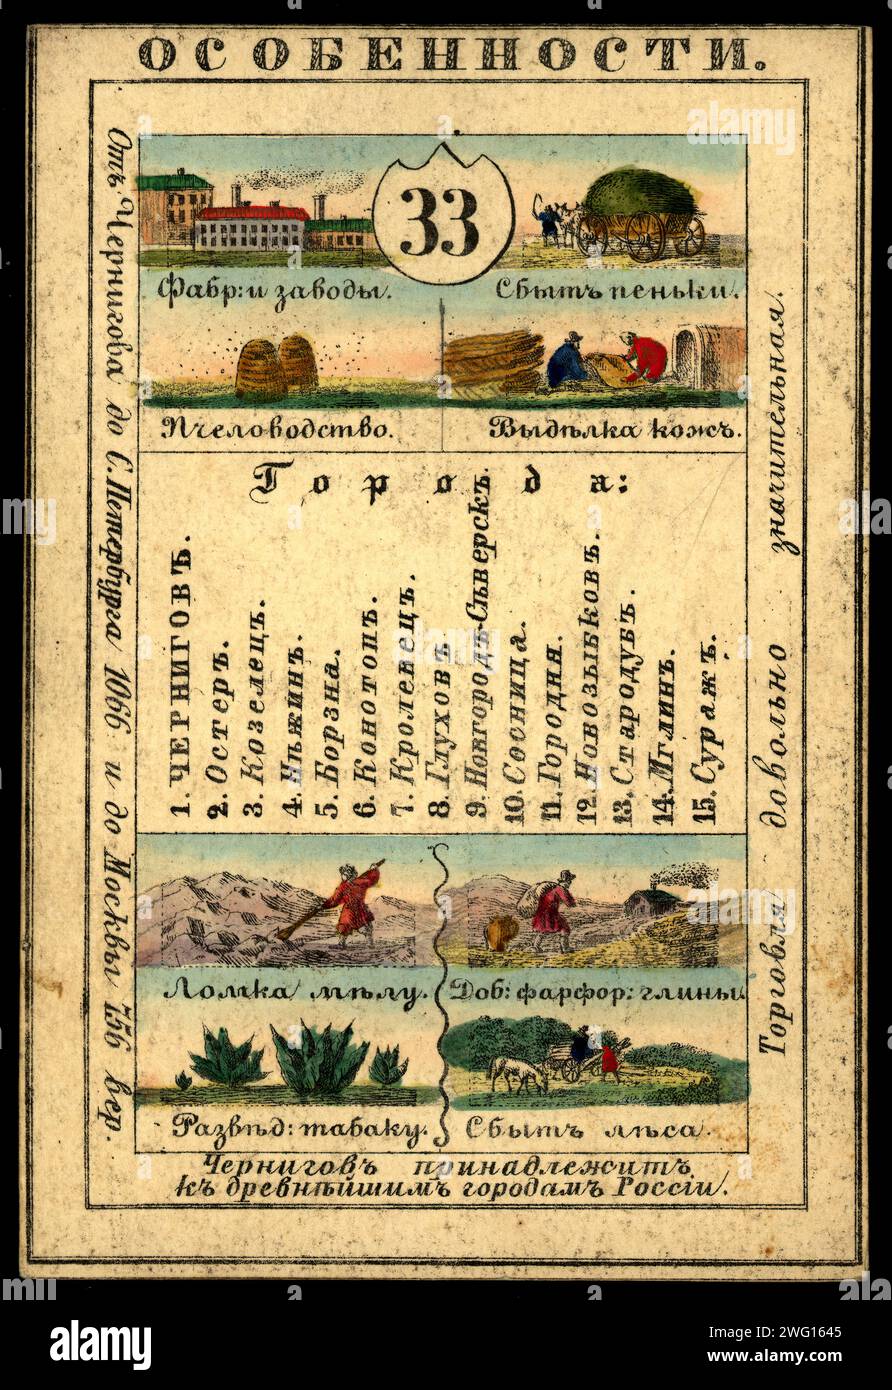 Chernigov Province, 1856. This card is one of a souvenir set of 82 illustrated cards-one for each province of the Russian Empire as it existed in 1856. Each card presents an overview of a particular province's culture, history, economy, and geography. The front of the card depicts such distinguishing features as rivers, mountains, major cities, and chief industries. The back of each card contains a map of the province, the provincial seal, information about the population, and the local costume of the inhabitants. National Library of Russia Stock Photo